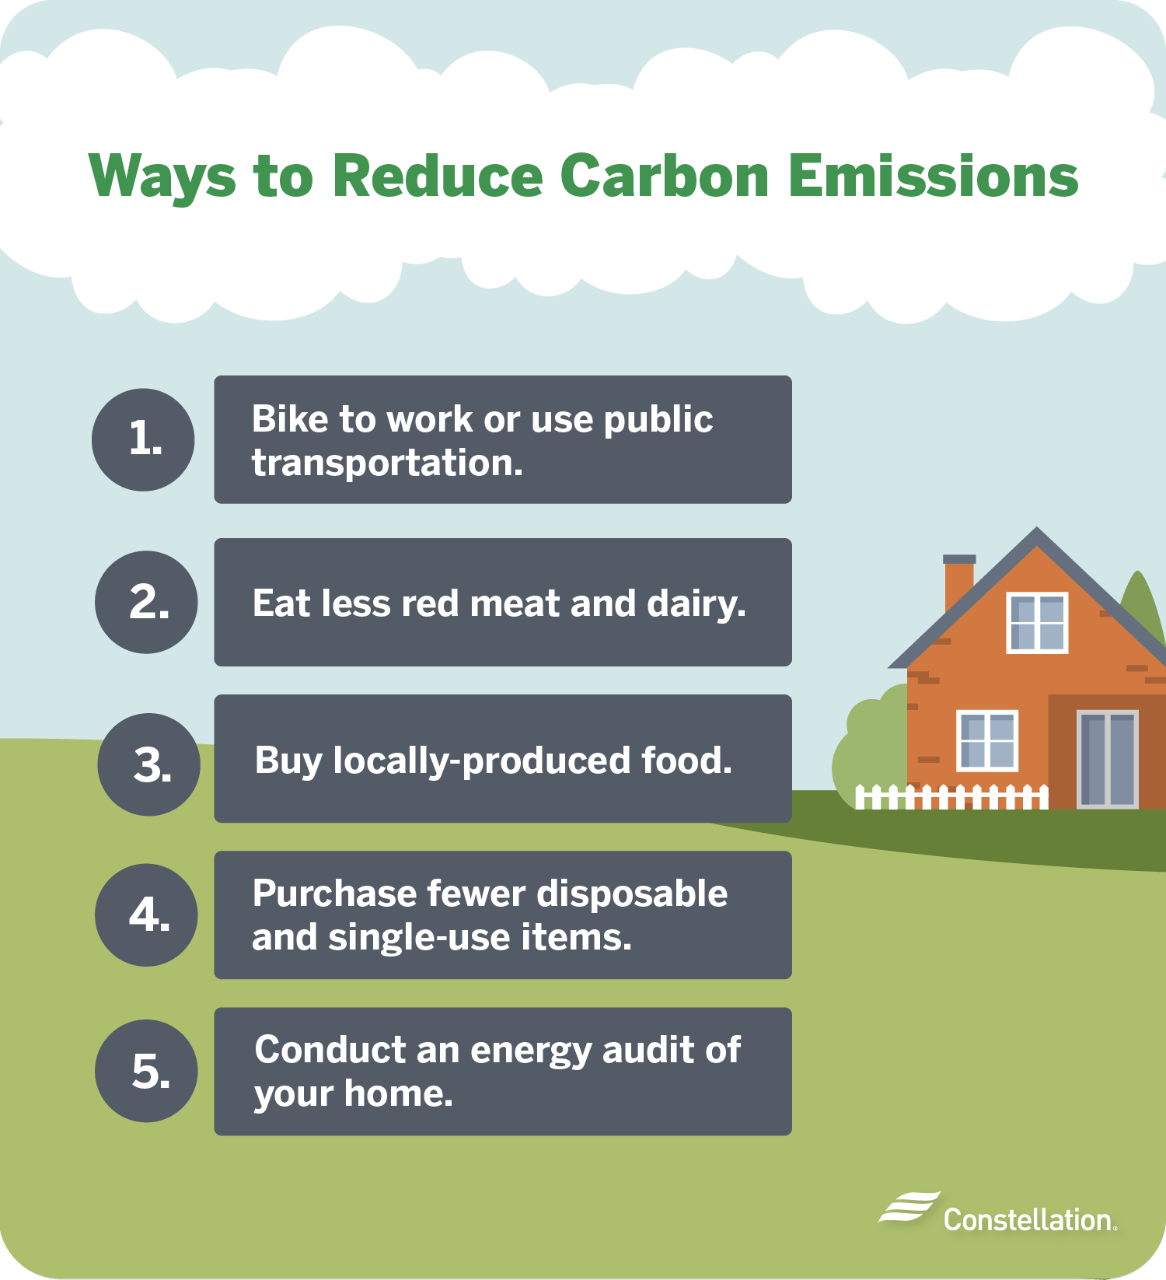 Ways to reduce carbon emissions